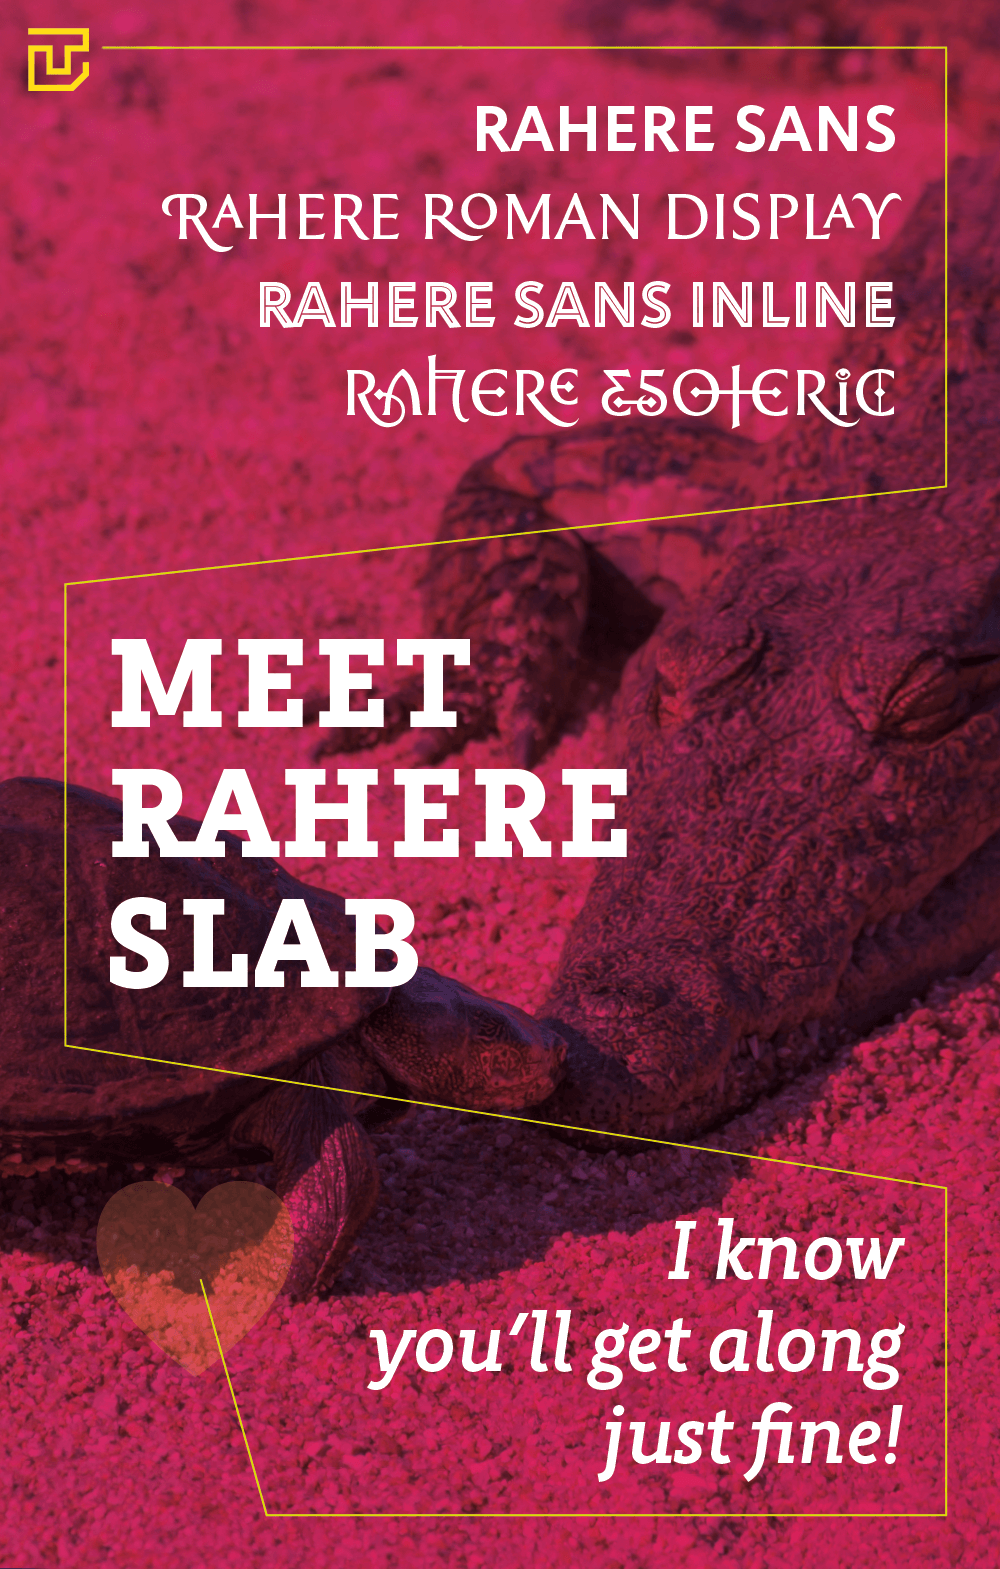 Rahere extended typeface family